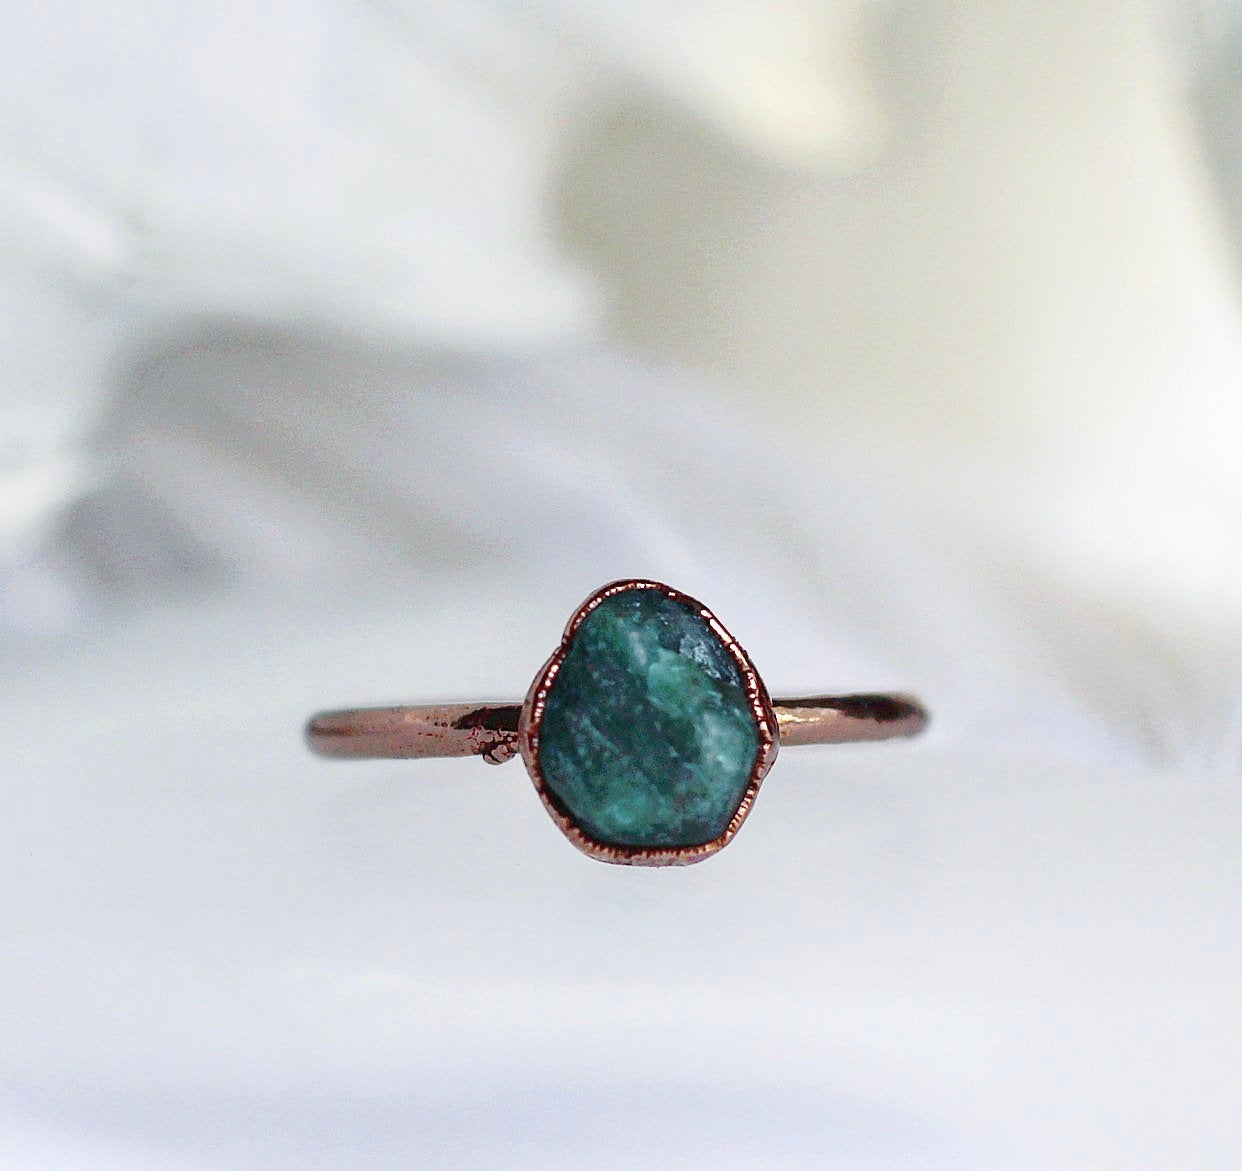 Raw Emerald Ring, Stackable Ring, May Birthstone Ring, Green Gemstone Ring, Raw Emerald Jewelry, May Birthday Jewelry, Raw Stone Ring